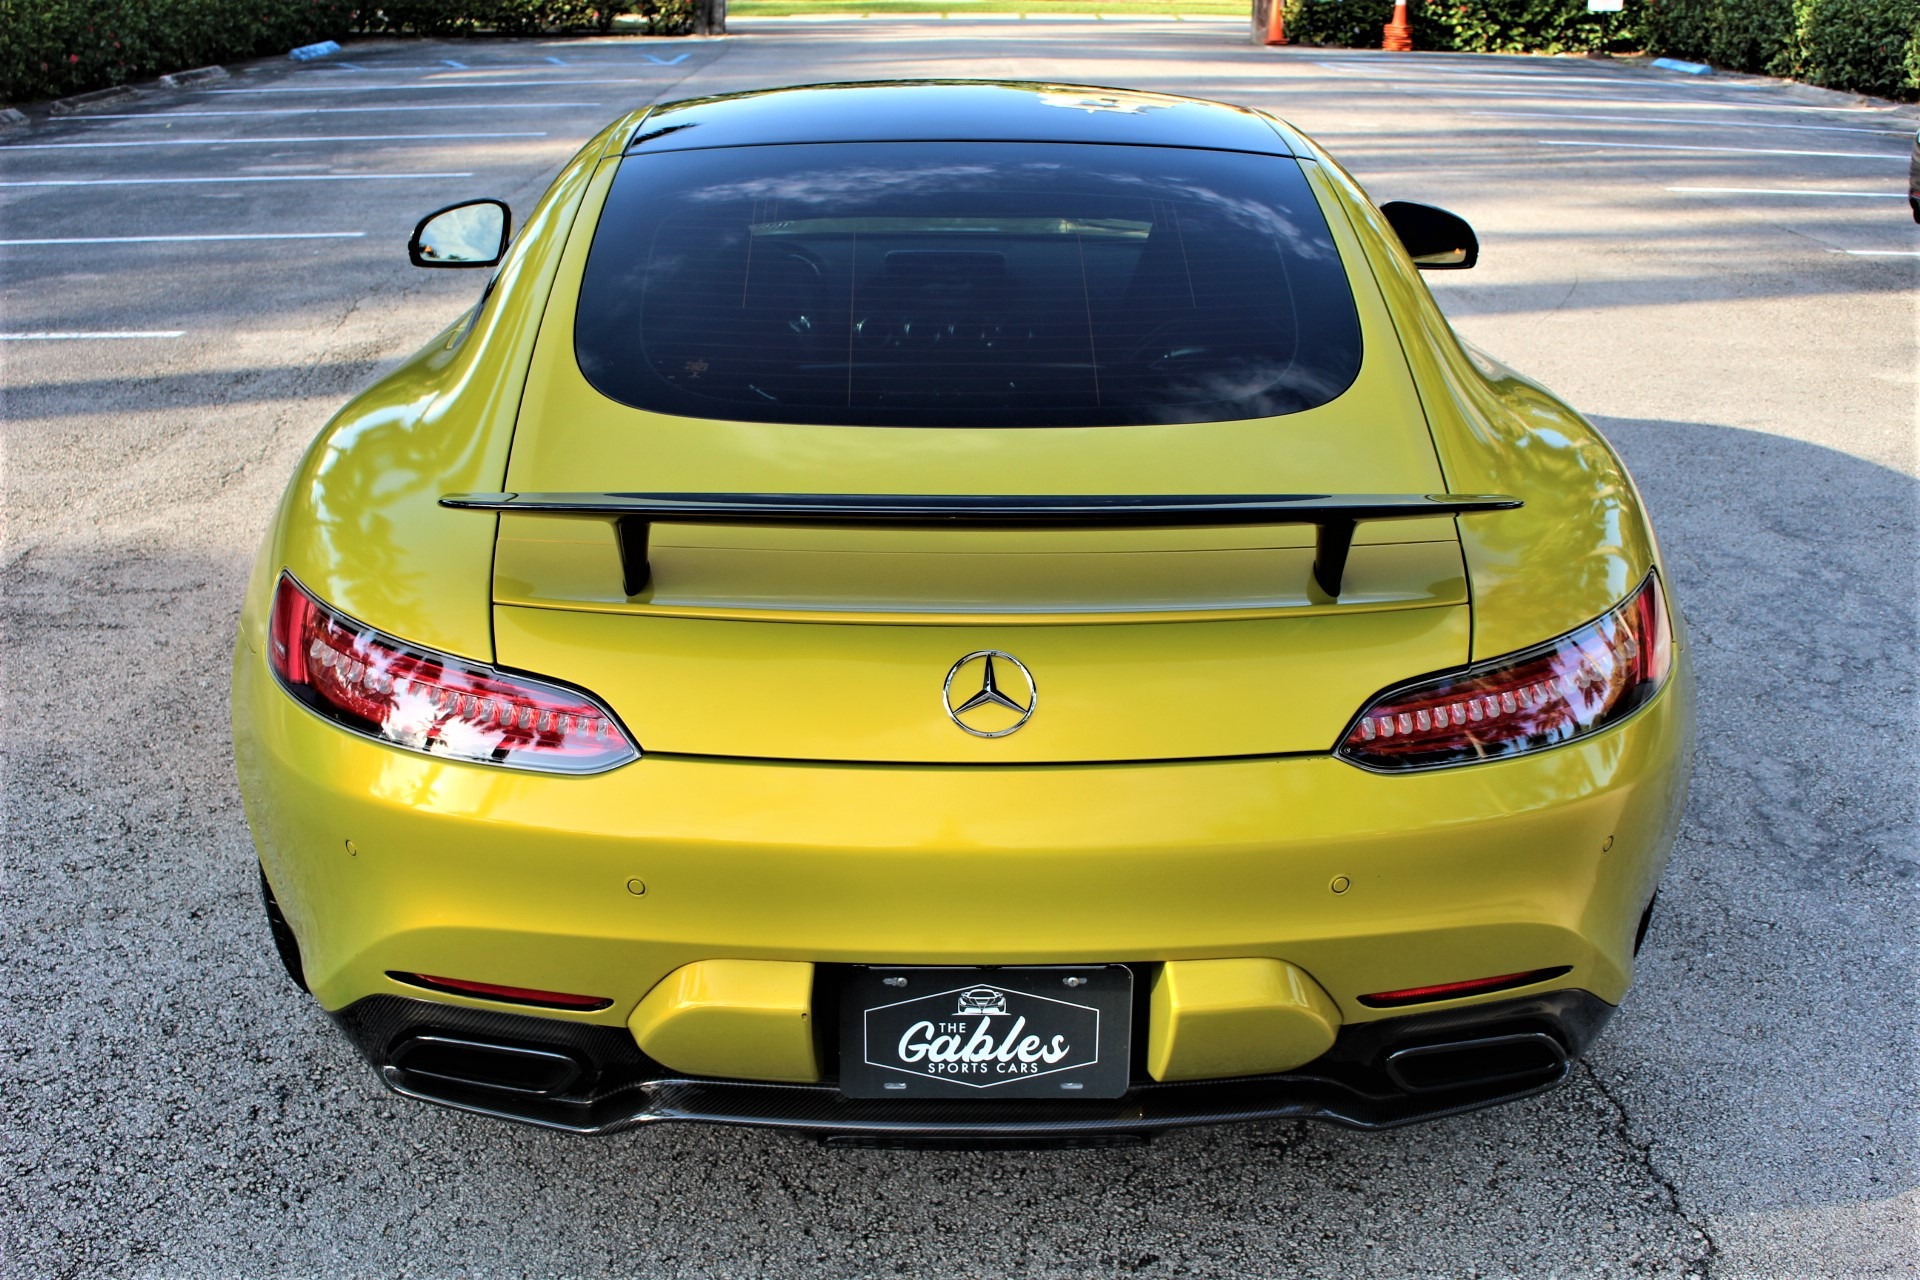 Used 2016 Mercedes-Benz AMG GT S for sale Sold at The Gables Sports Cars in Miami FL 33146 4